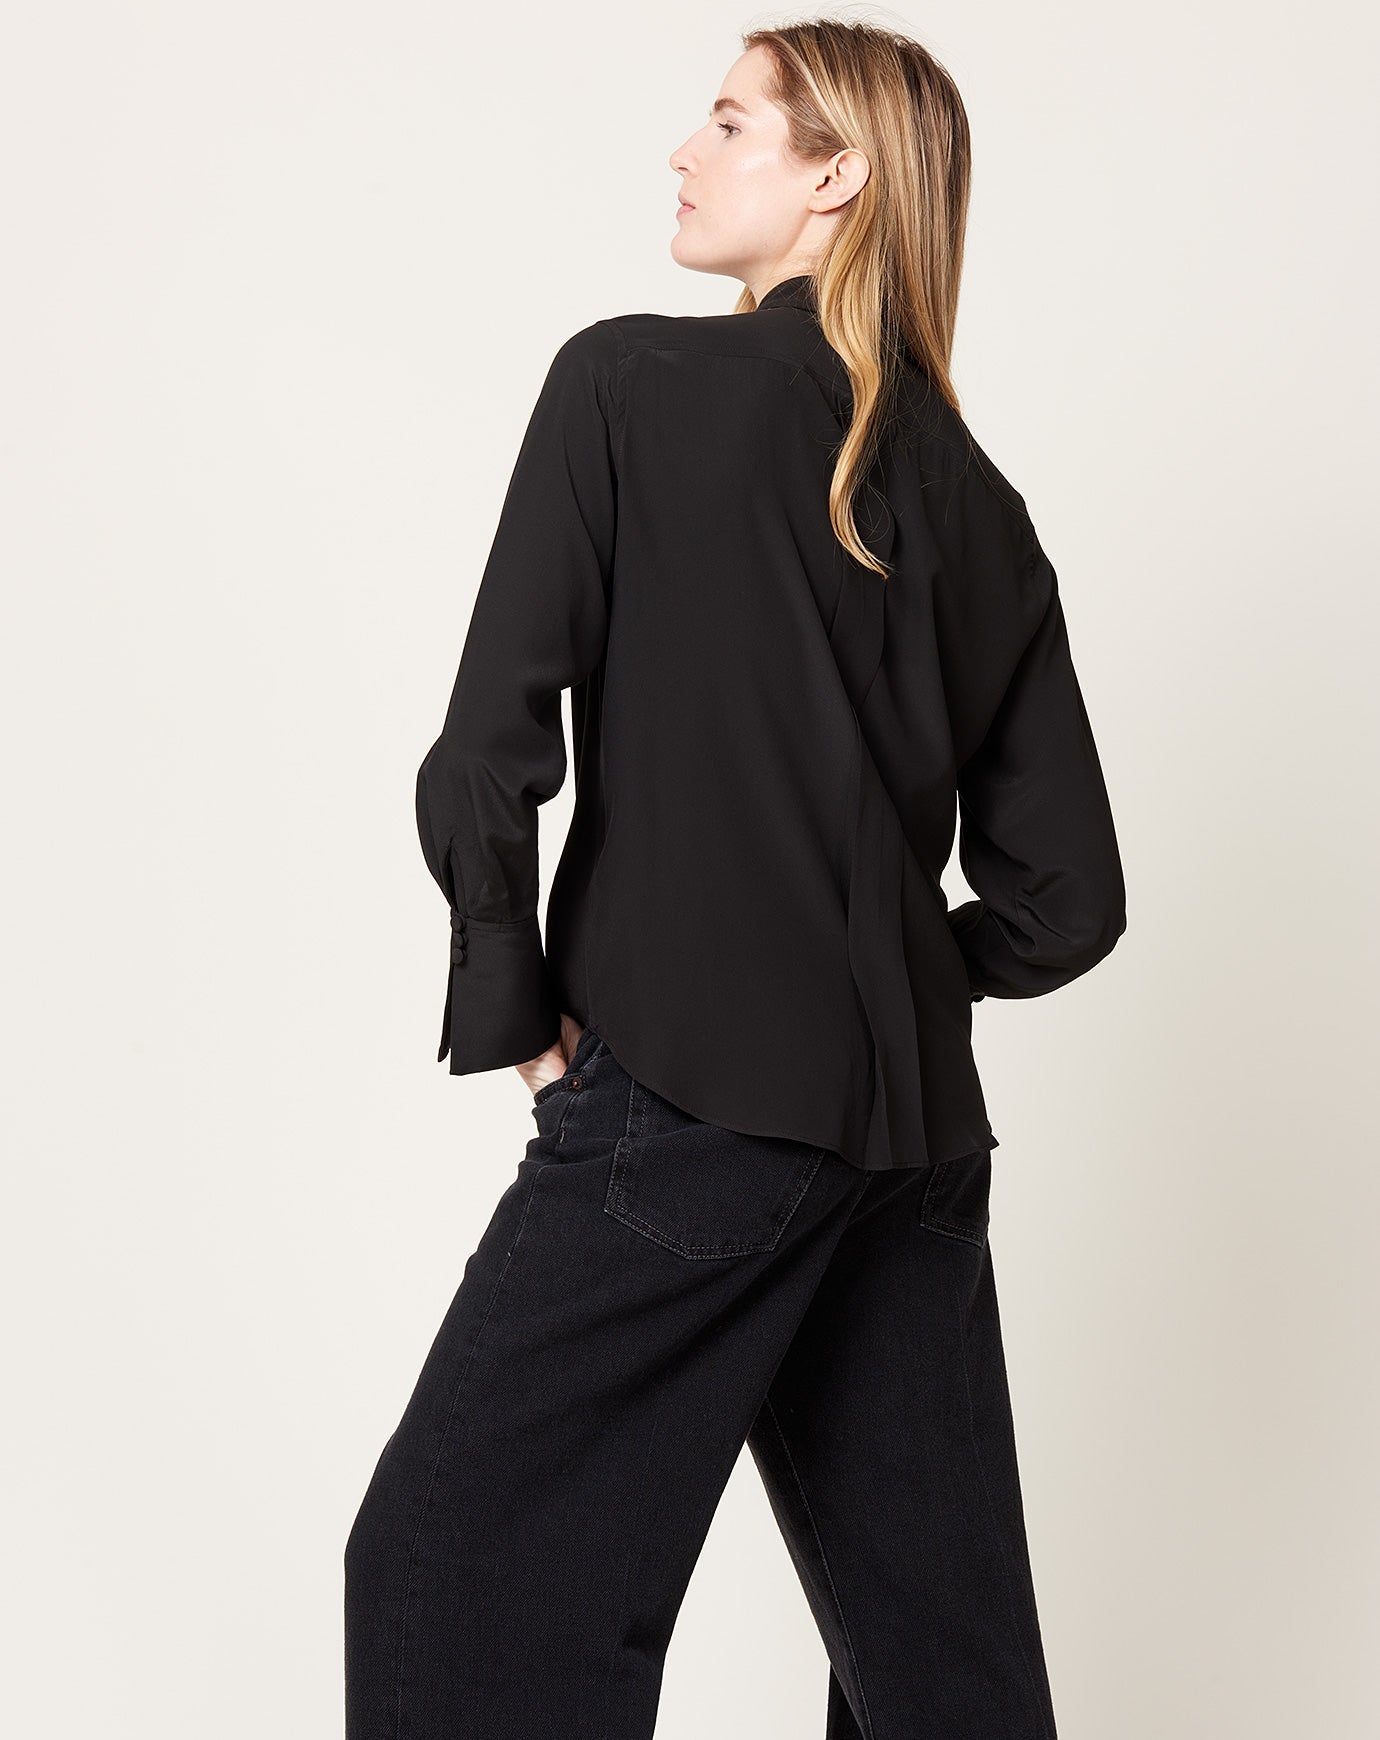 A'Court Iris Blouse in Black